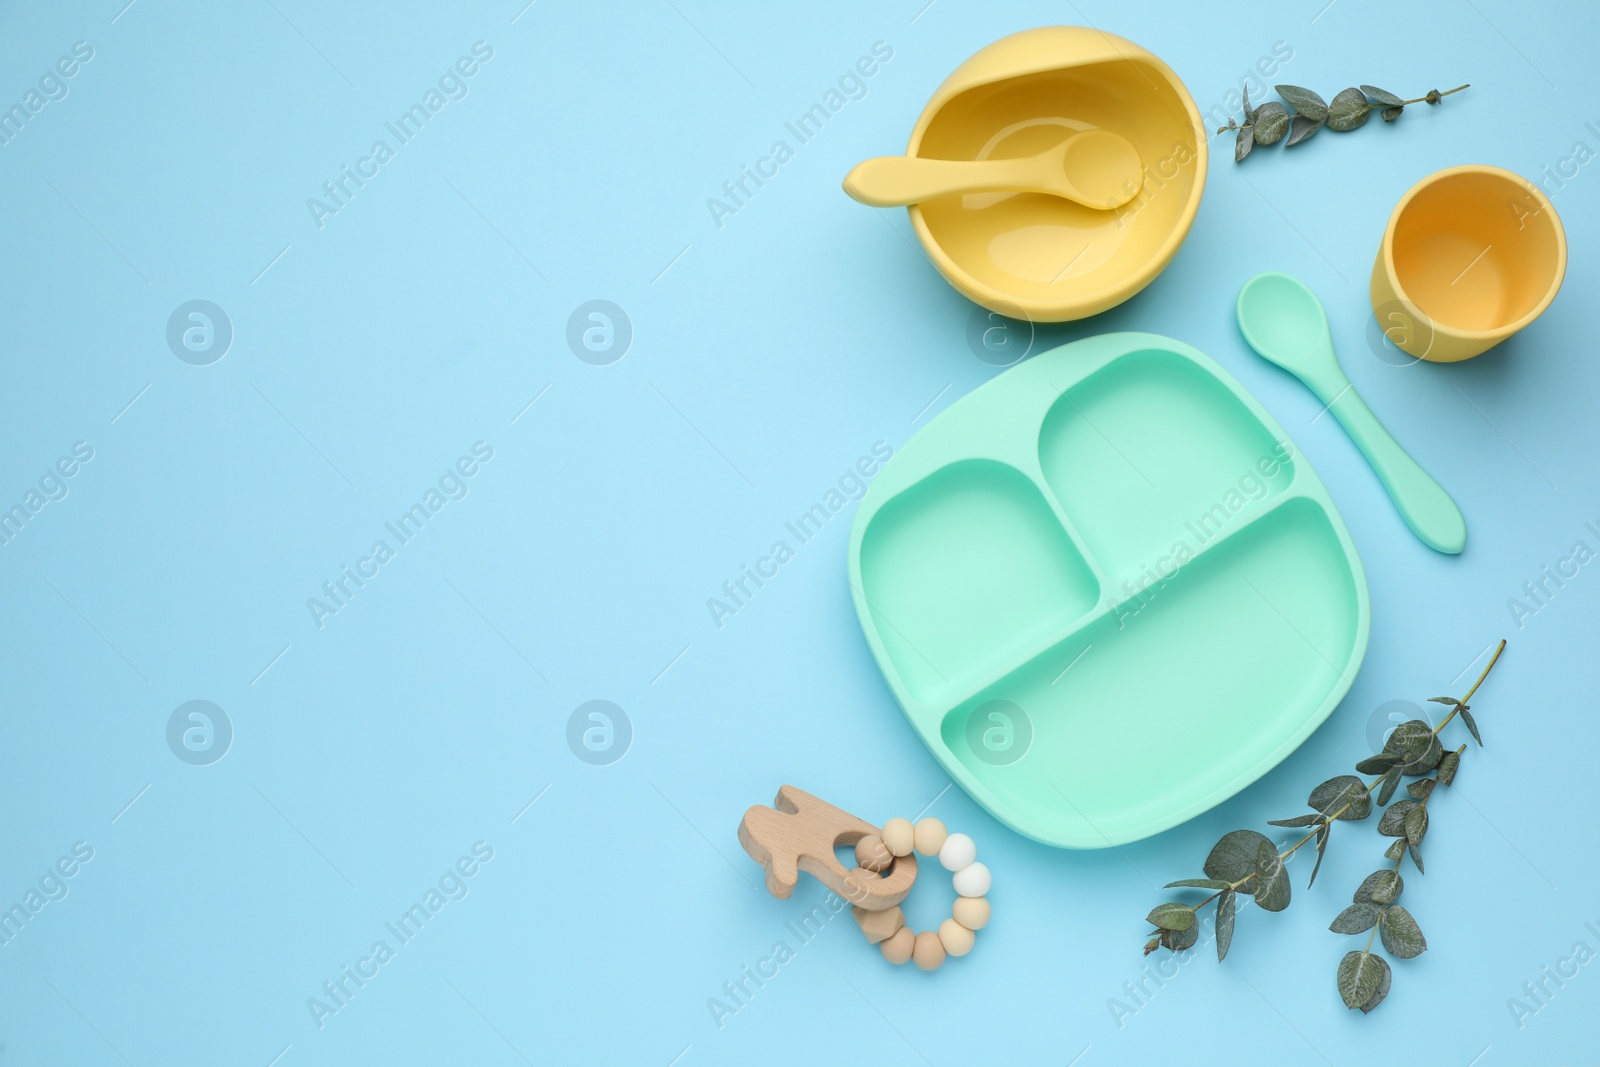 Photo of Set of plastic dishware and wooden toy on light blue background, flat lay with space for text. Serving baby food